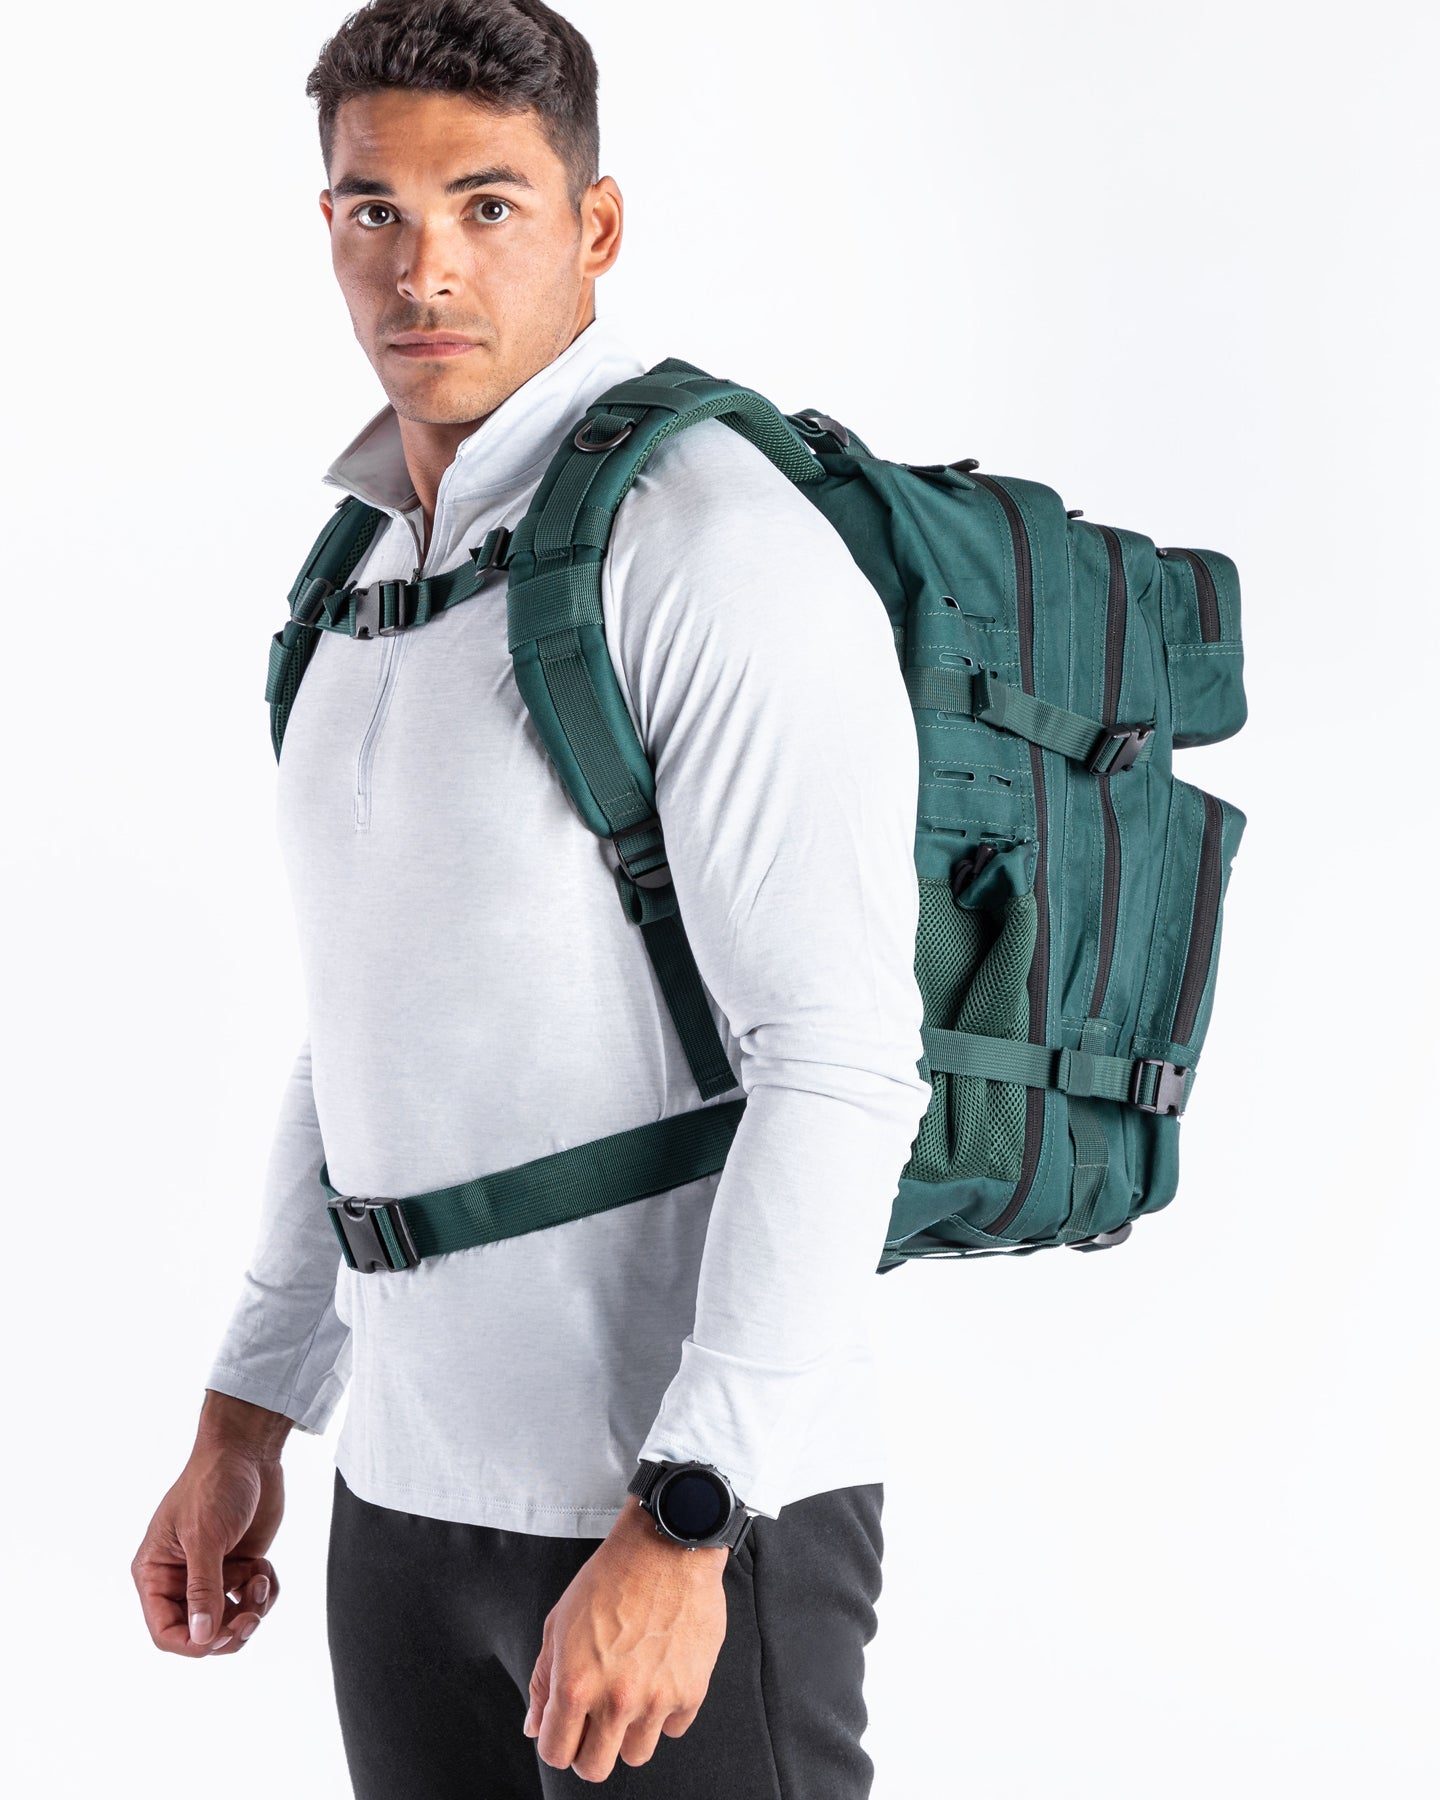 Large Forest Green Gym Backpack